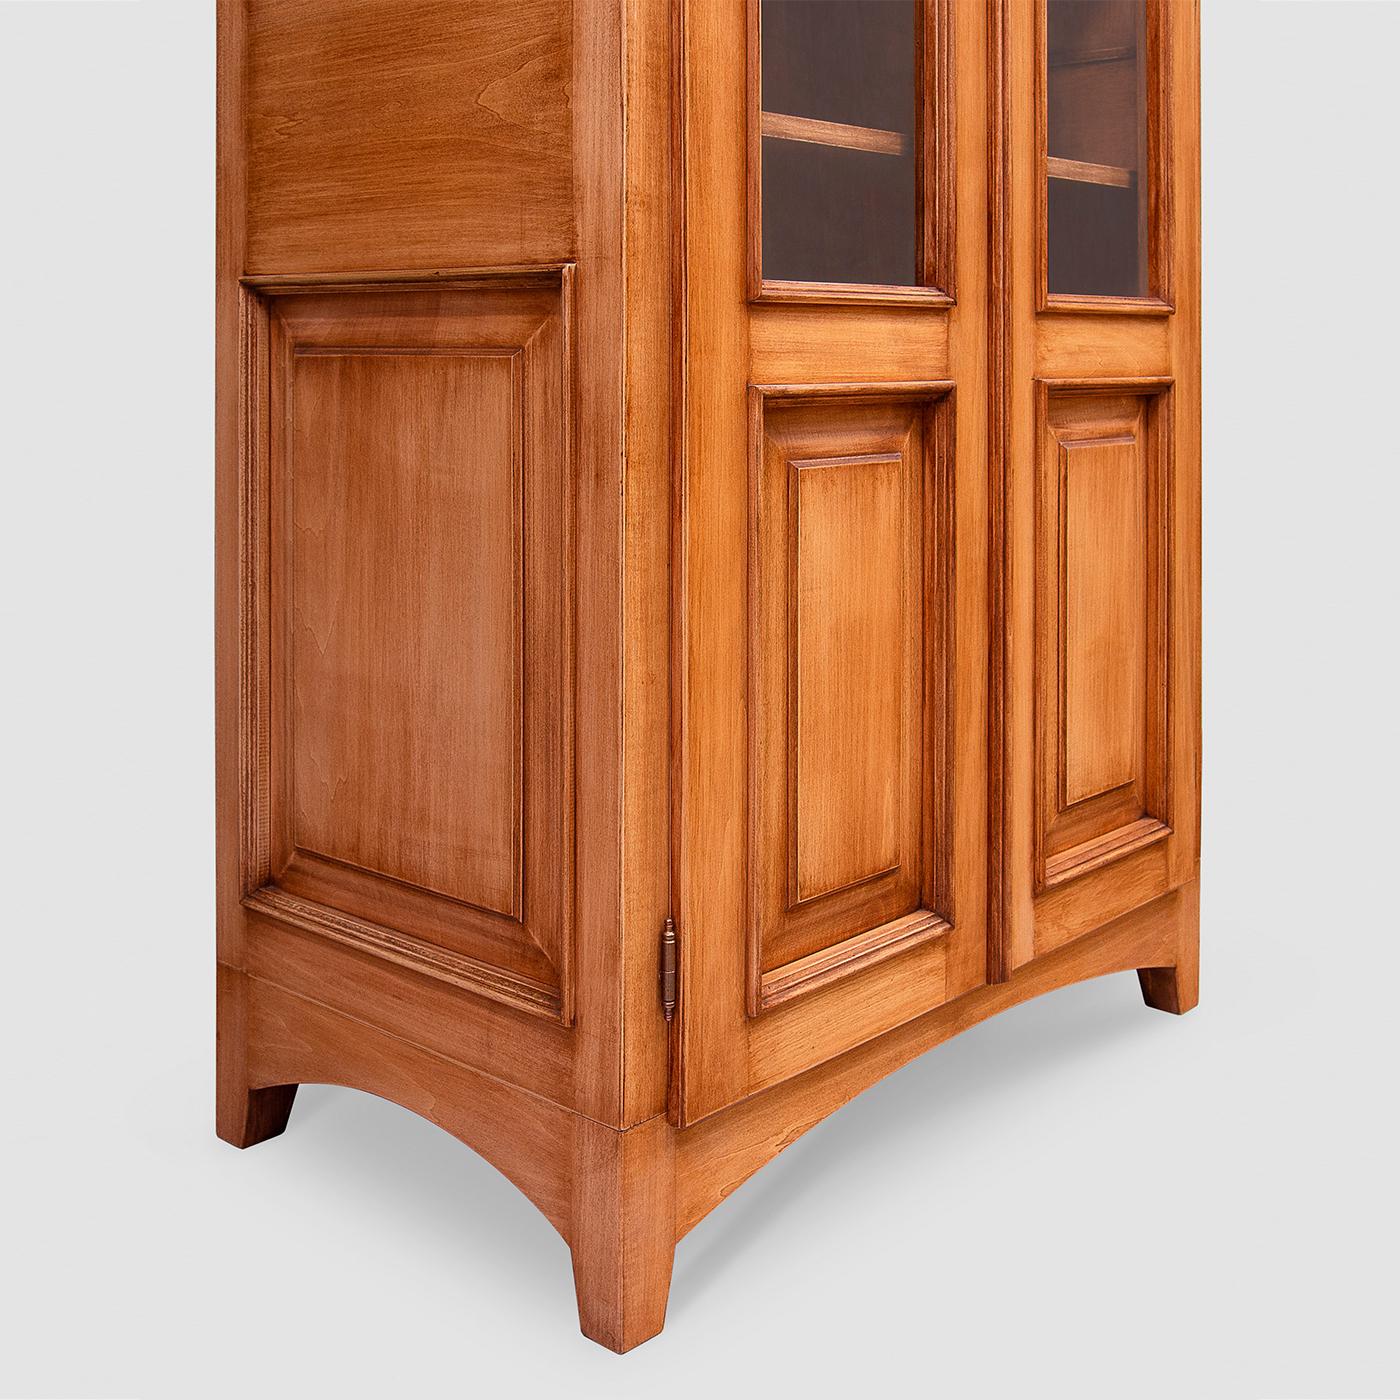 An exquisite example of classic style, this bookcase features a tall structure entirely handcrafted of tulipwood and stained in light walnut using nontoxic, sustainable lacquers. Framed by streamlined borders and frame-like decorations carved on the